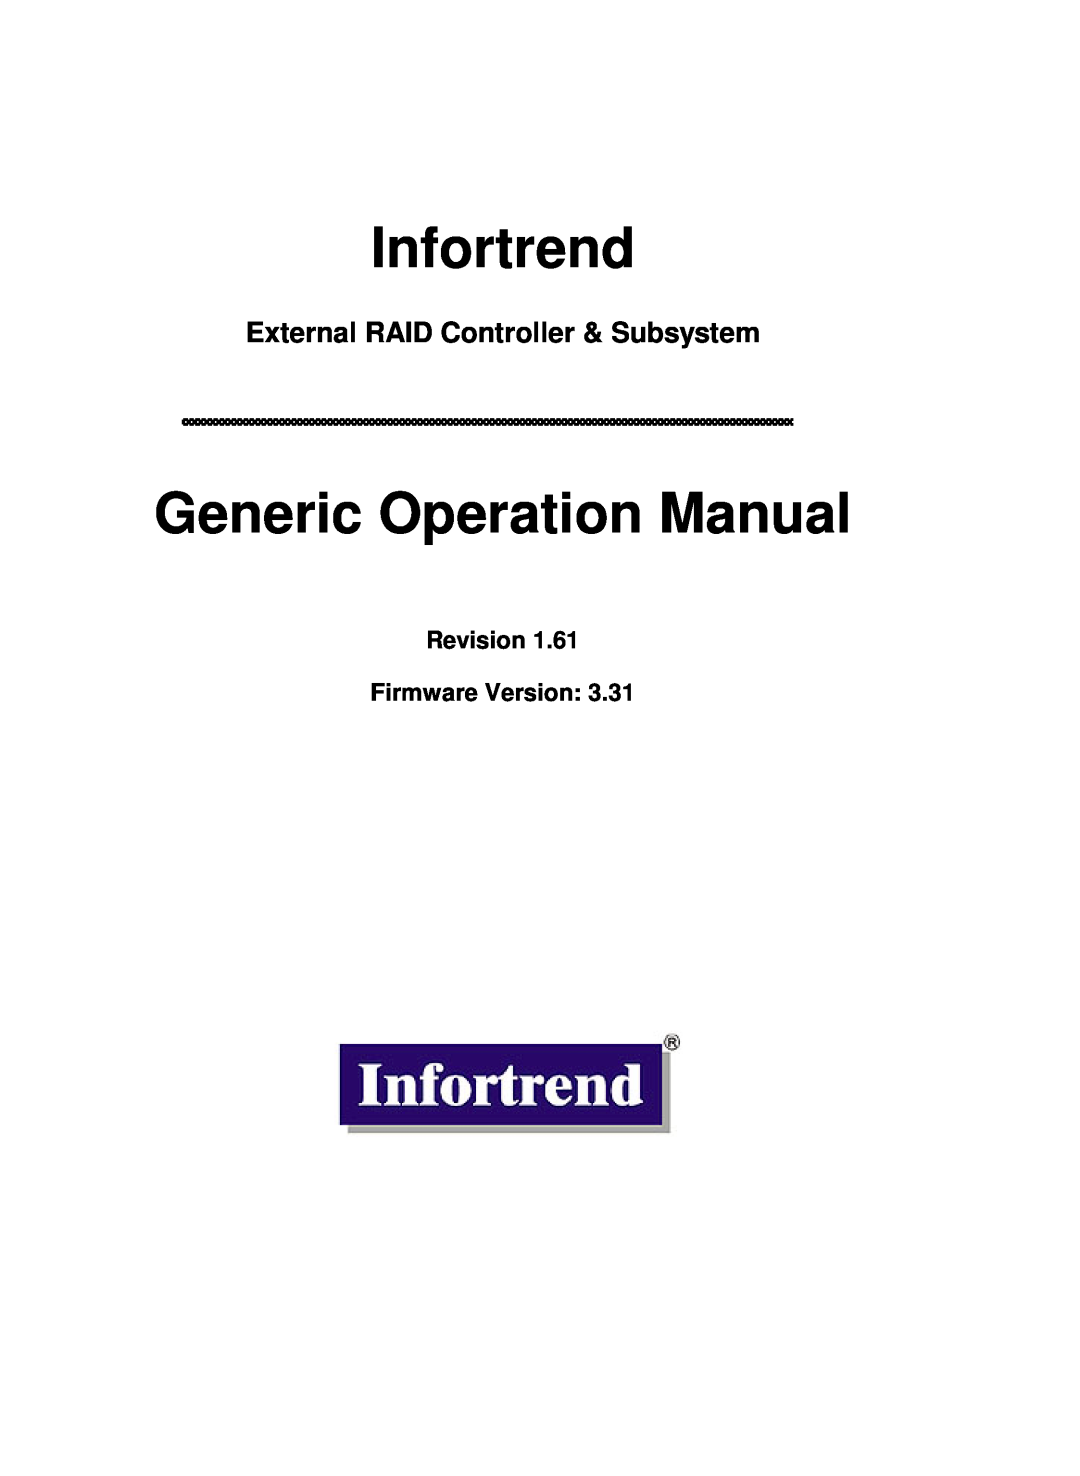 Compaq Infortrend manual External RAID Controller & Subsystem, Revision Firmware Version, Generic Operation Manual 